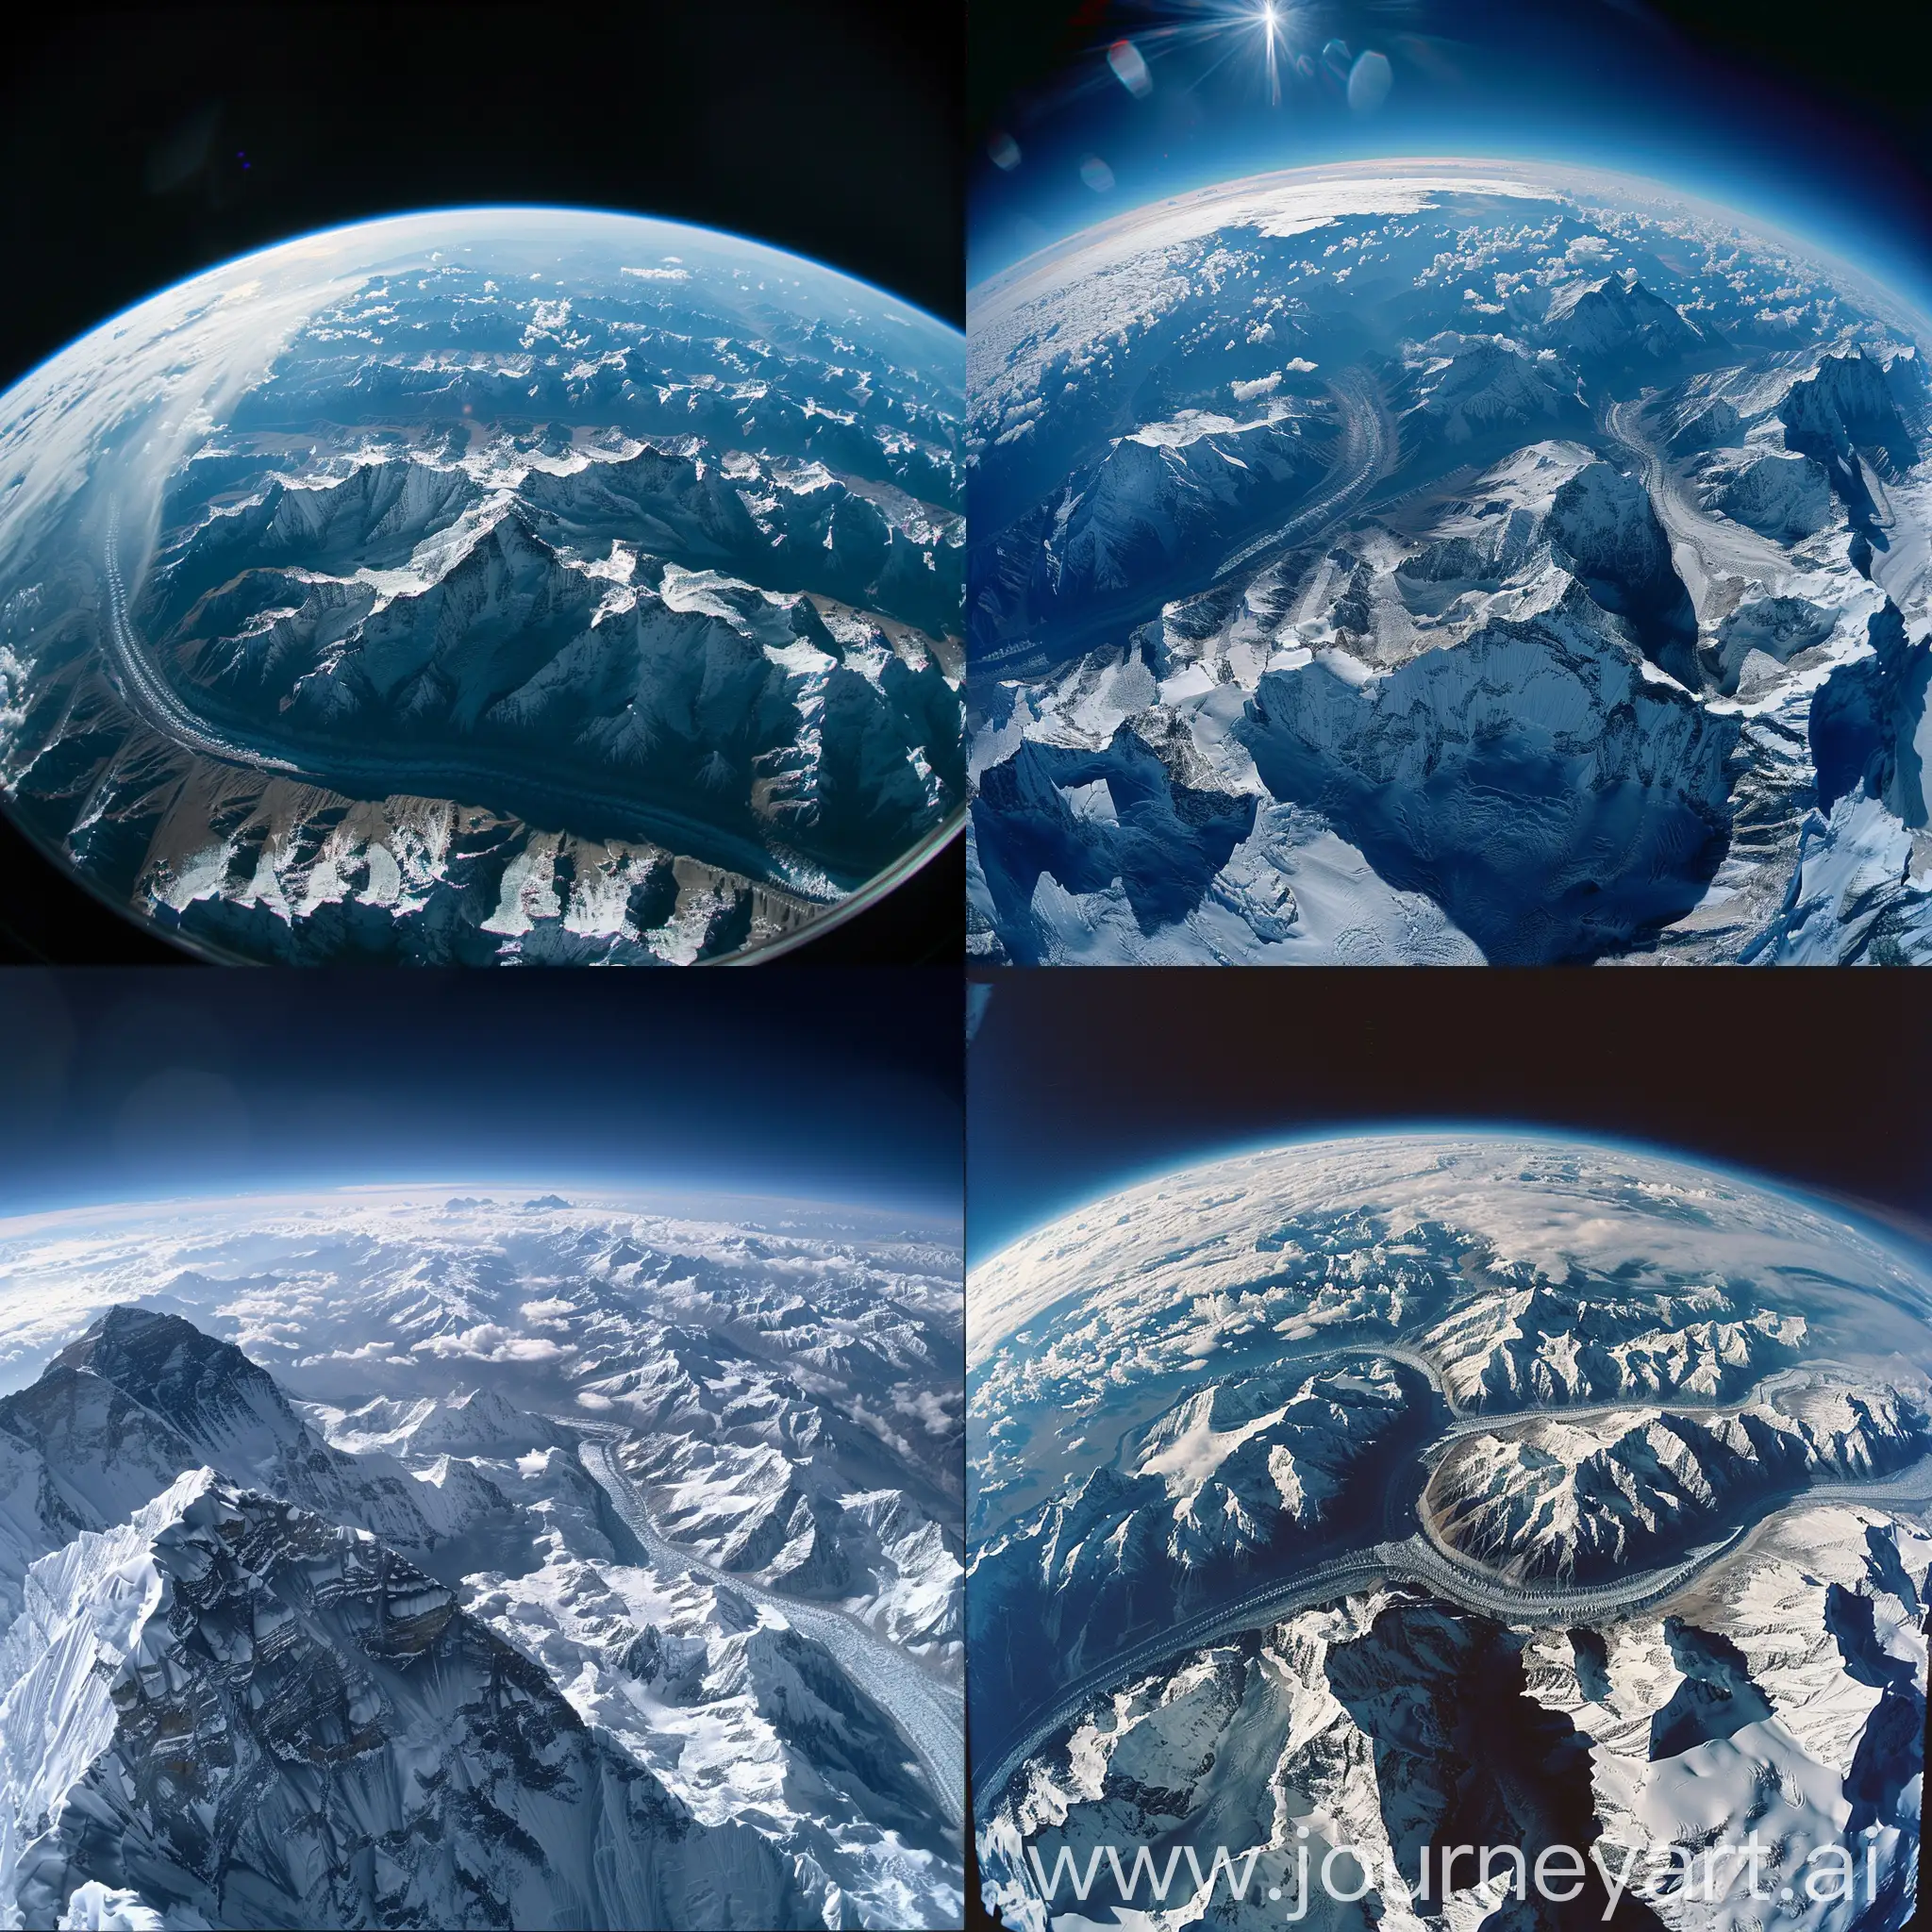 View of Earth captured from top of the Mount Everest